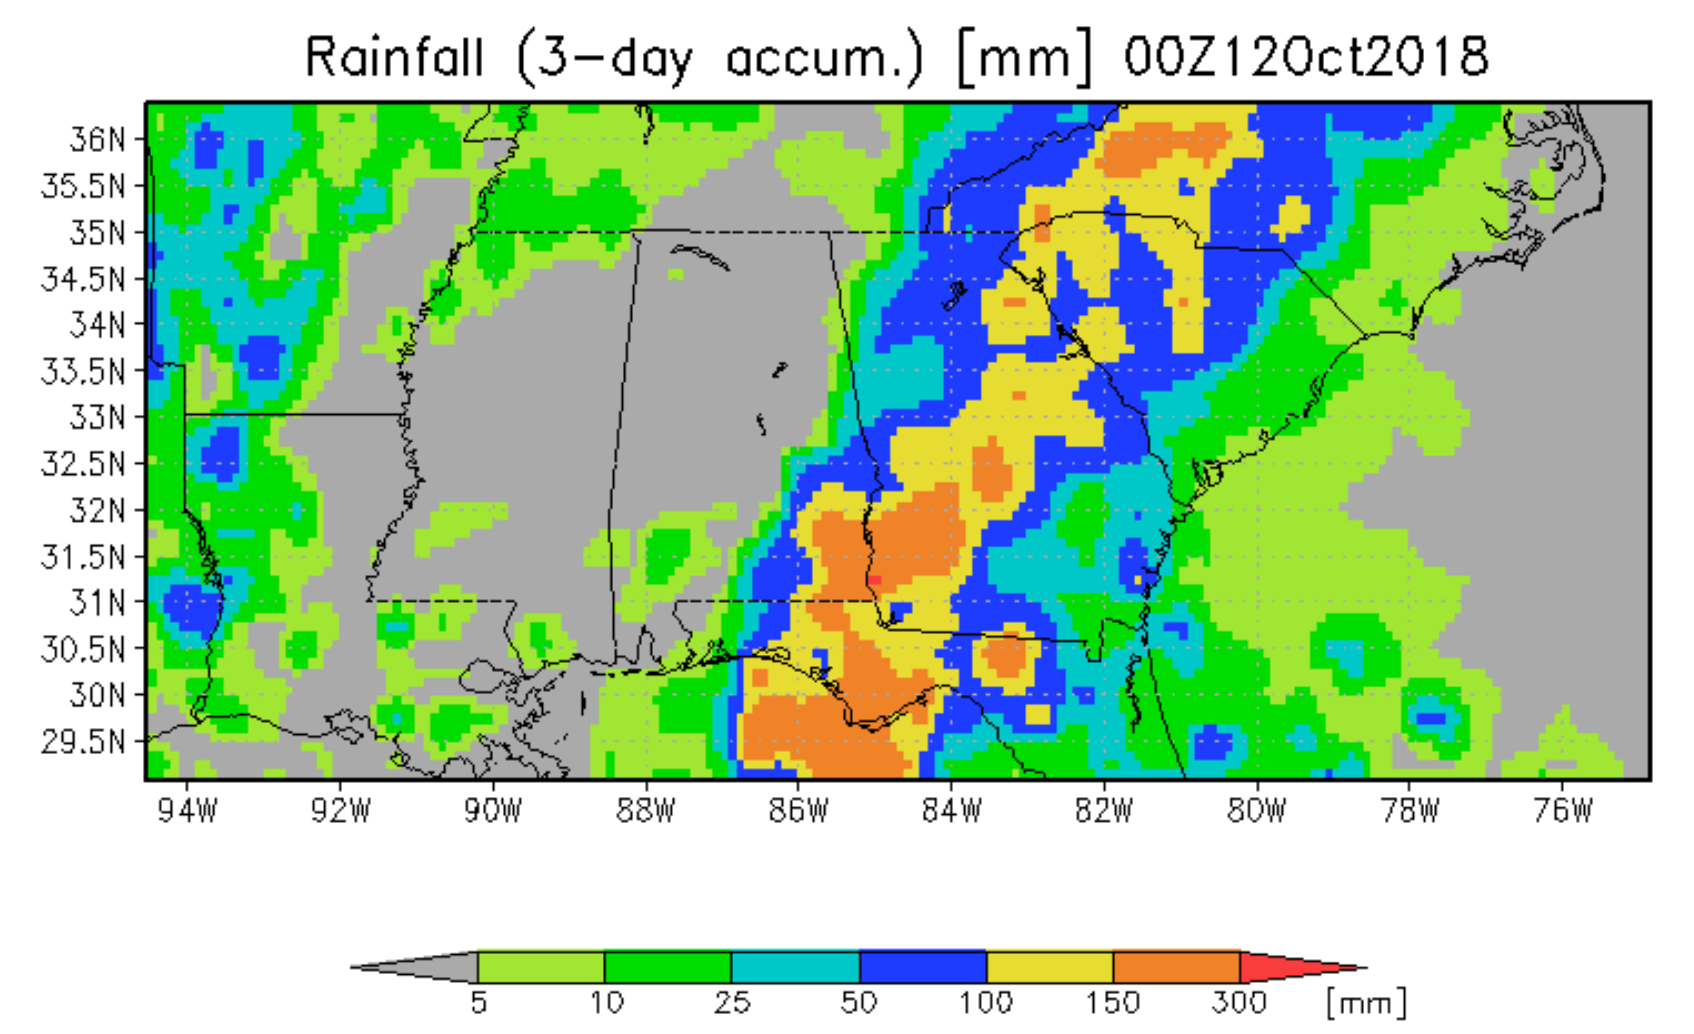 Image of flood and rain intensity forecast for Hurricane